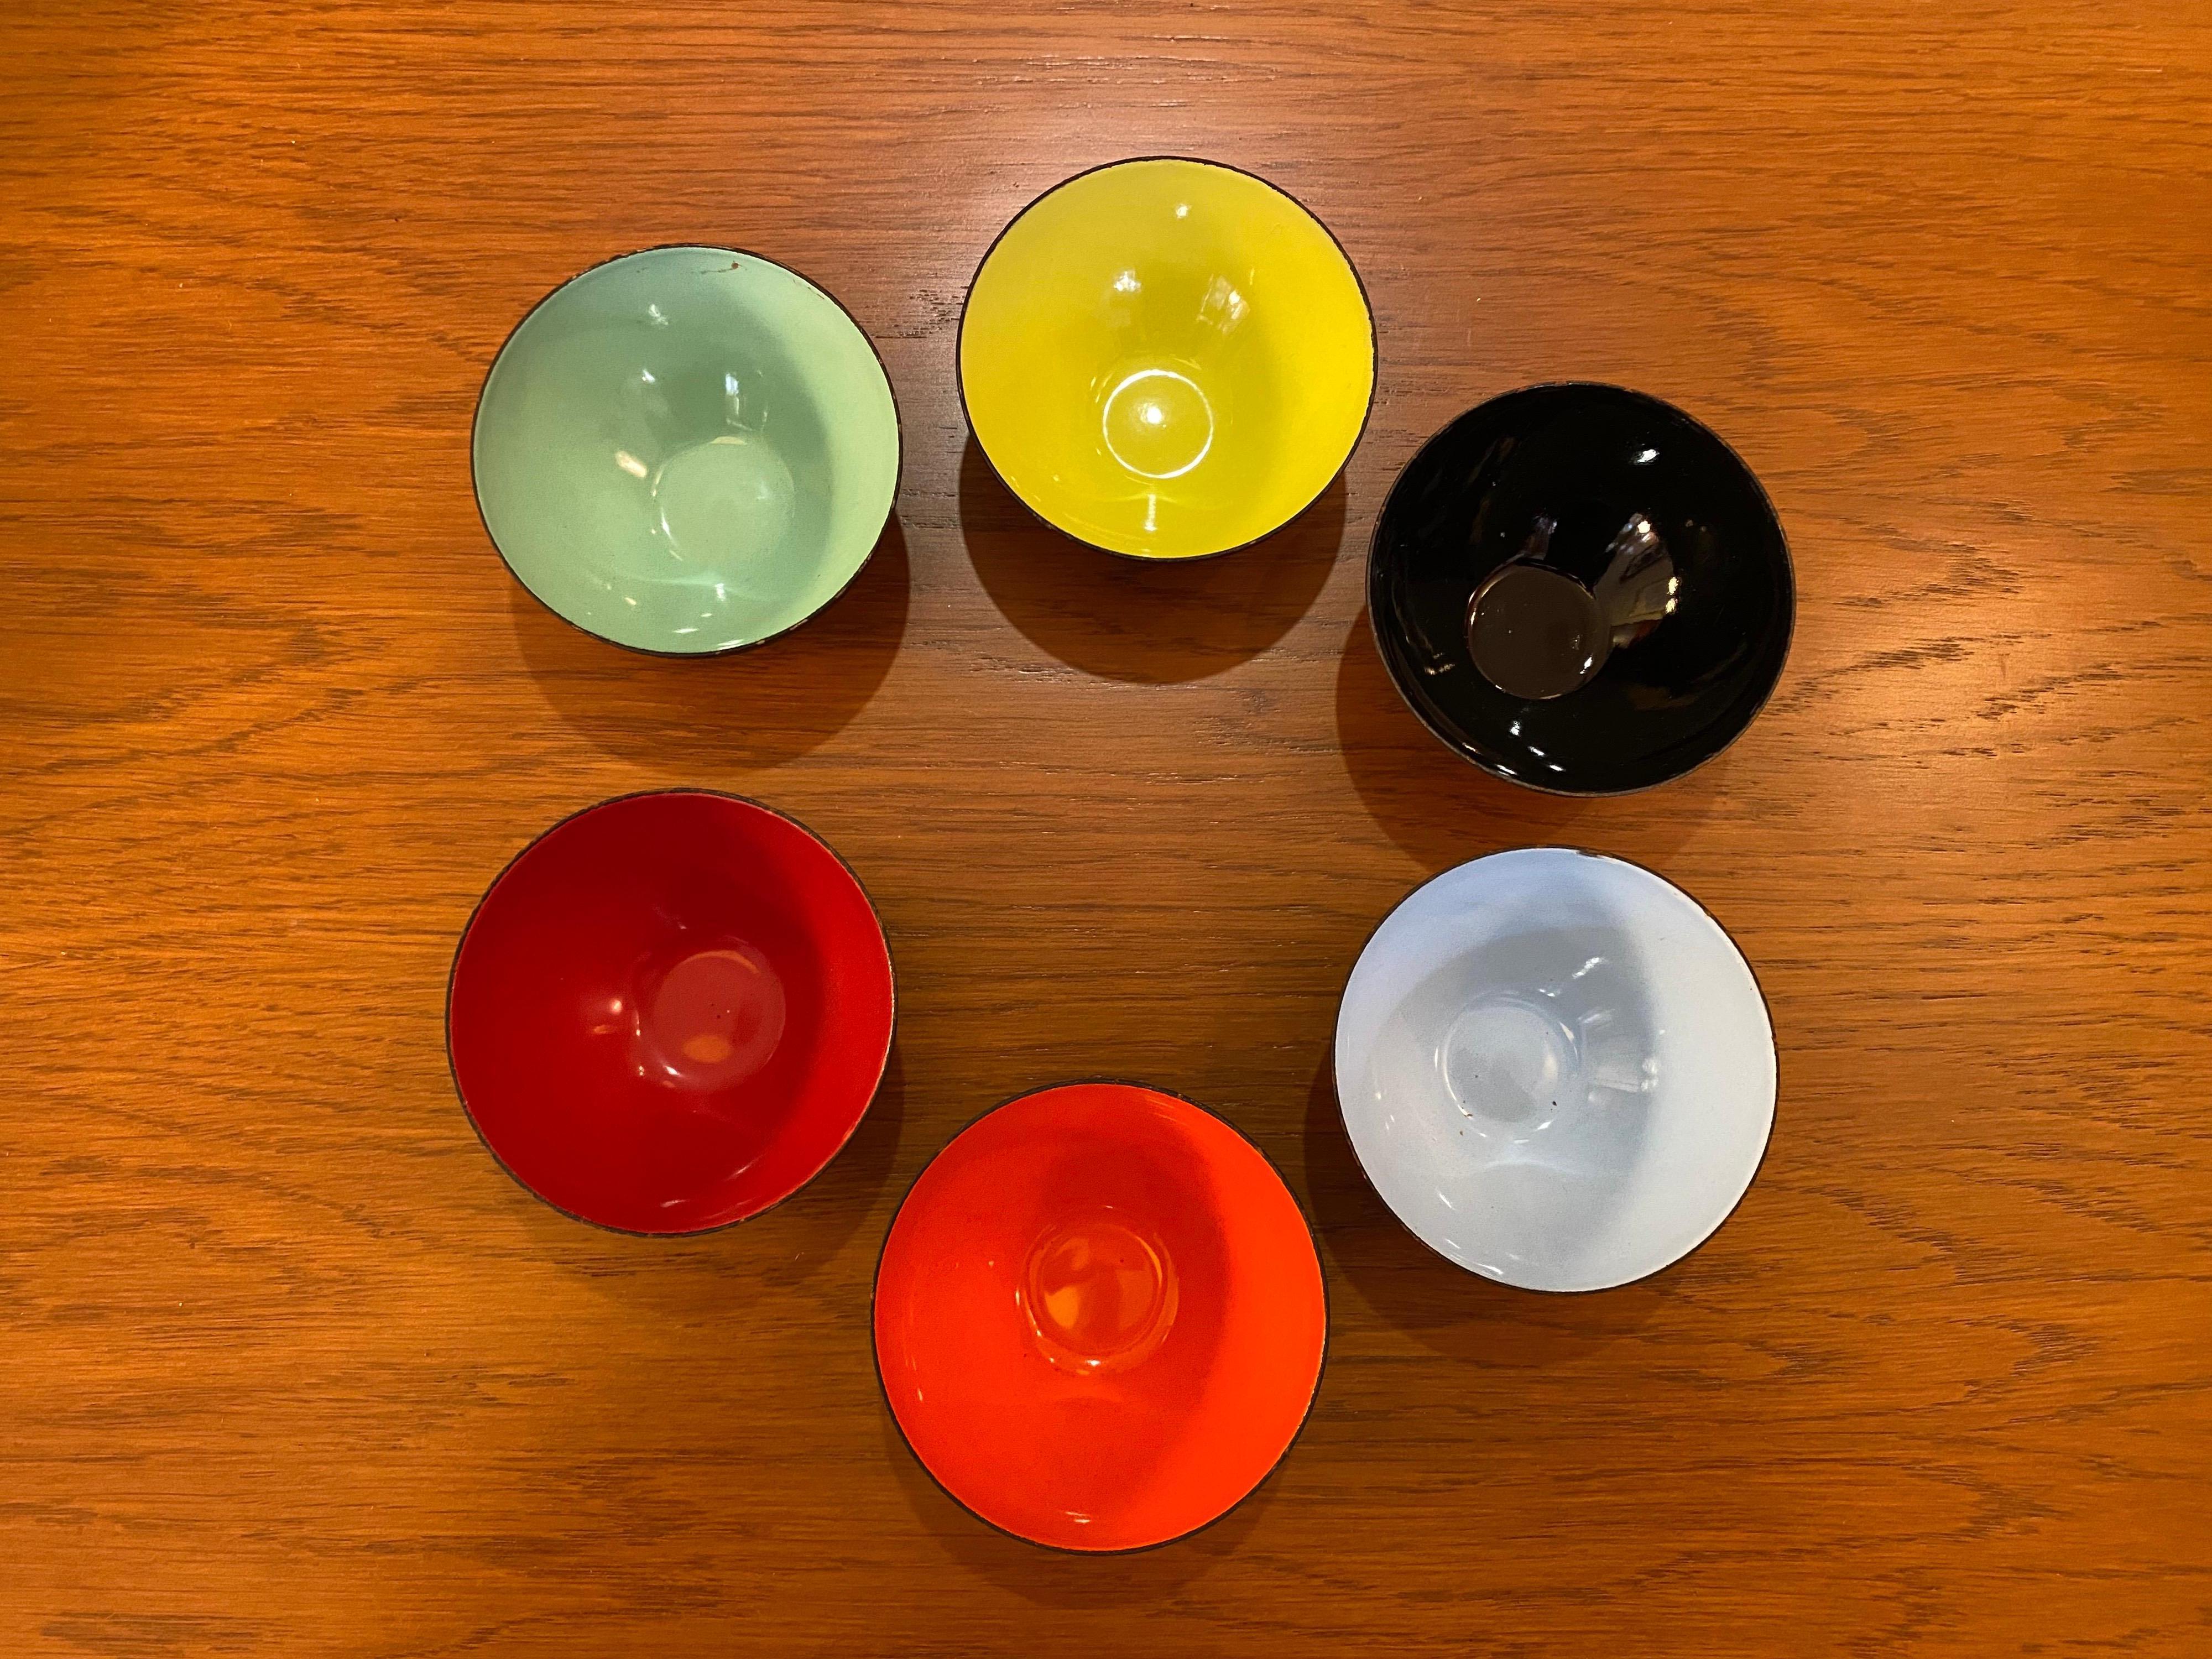 Krenit bowls are icons of Danish modern design. Designed by Herbert Krenchel. Beautiful black matt metal bowls with multi-colored insides. 12 pieces total: ((1) 11